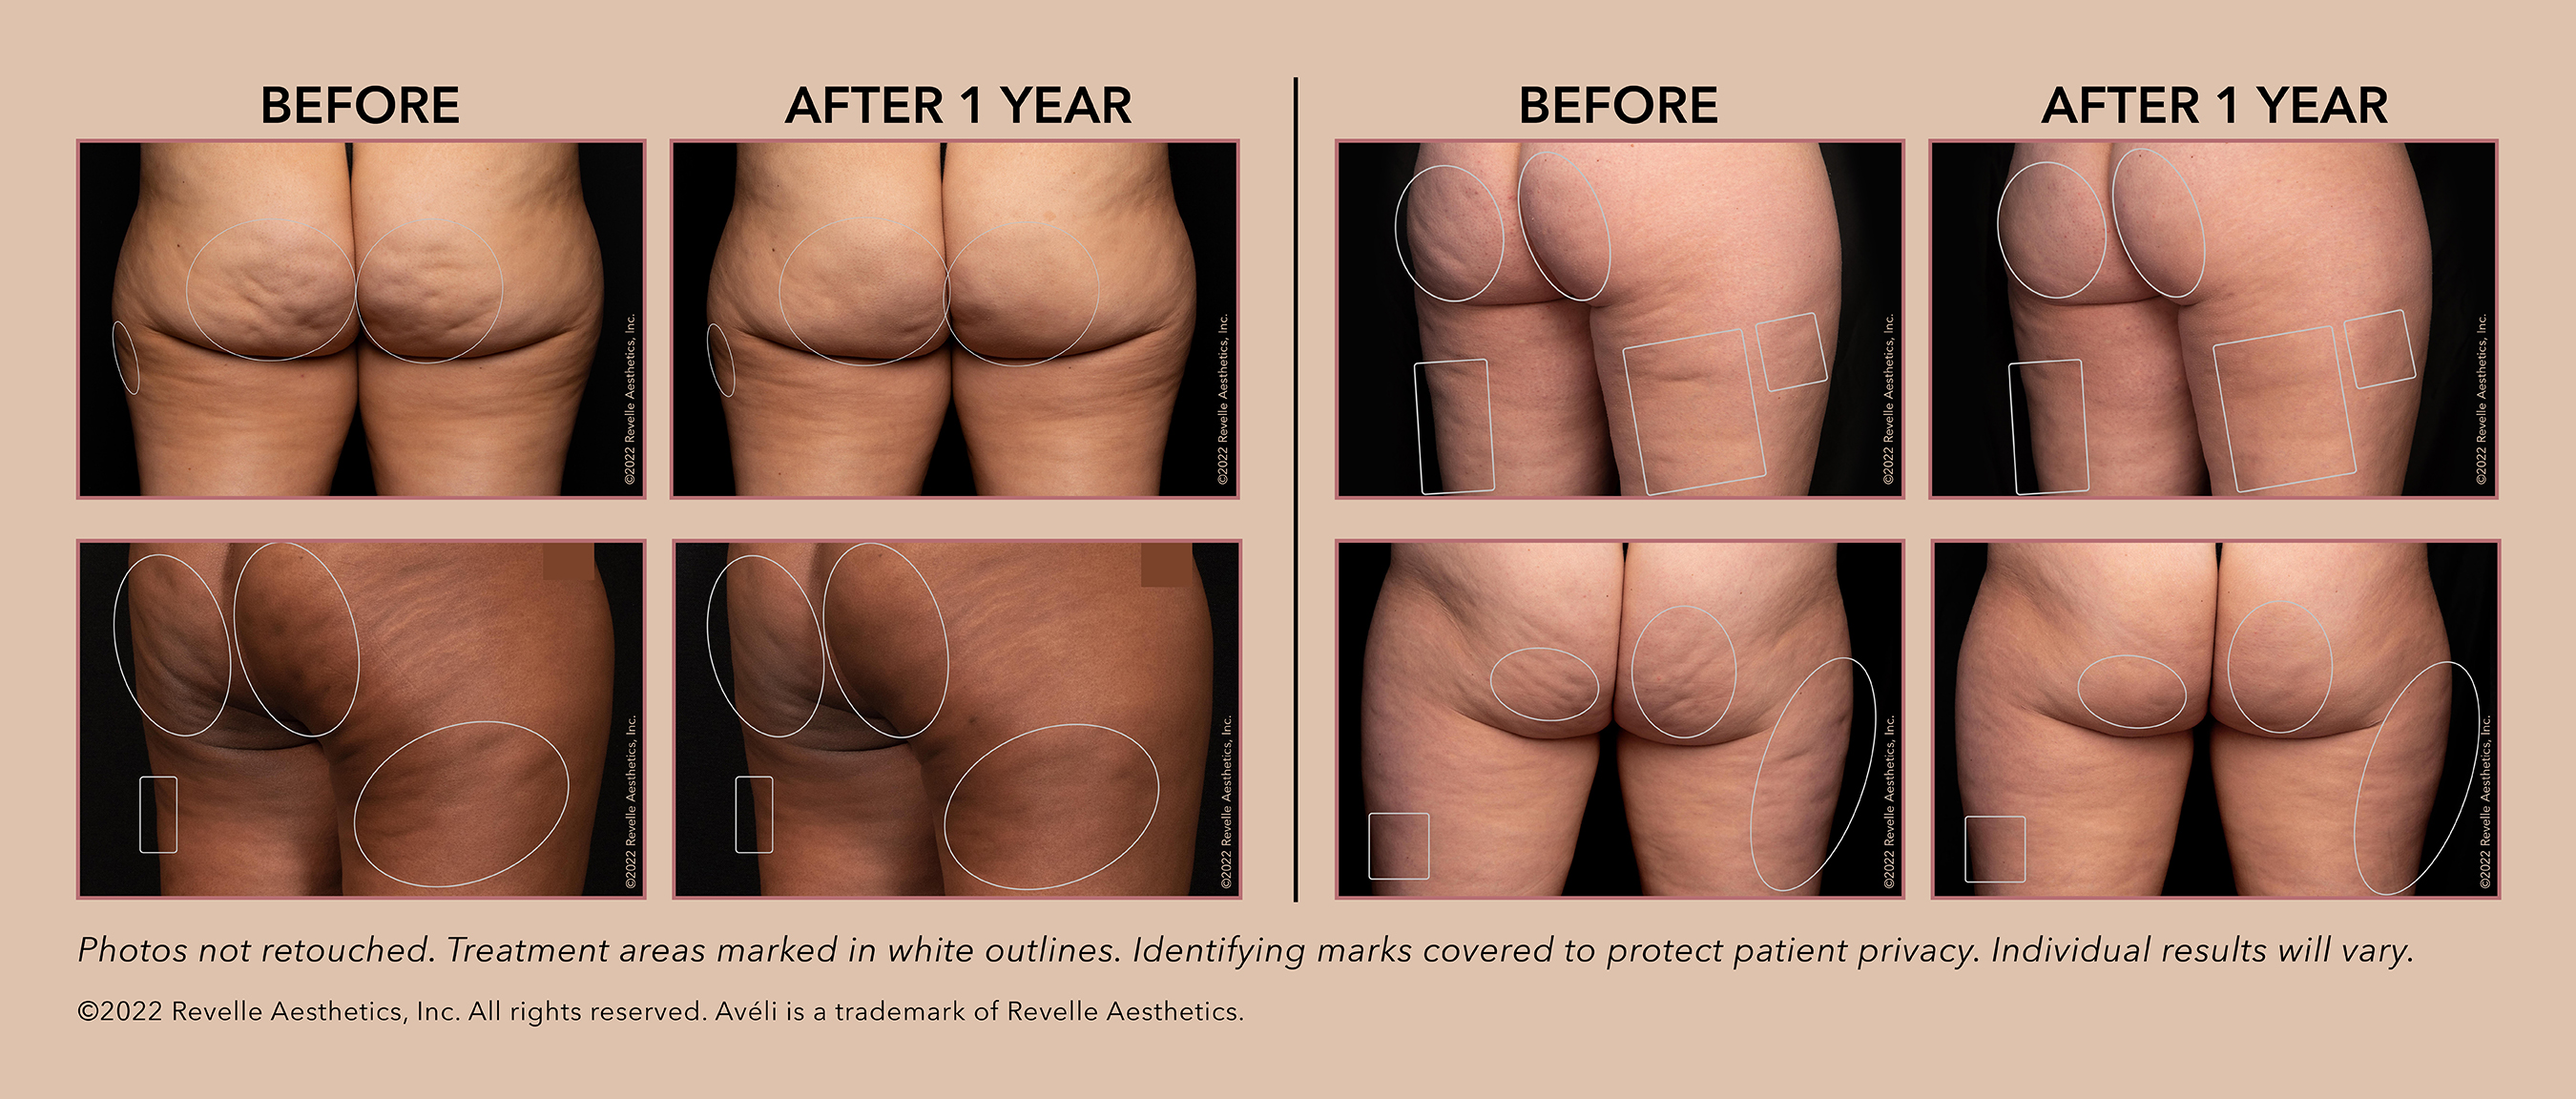 Aveli™ delivers long-lasting cellulite reduction in the buttocks and thighs after a single procedure. After photos demonstrate durable results at one year post procedure. Photos not retouched. Treatment areas marked in white outlines. Individual results will vary.